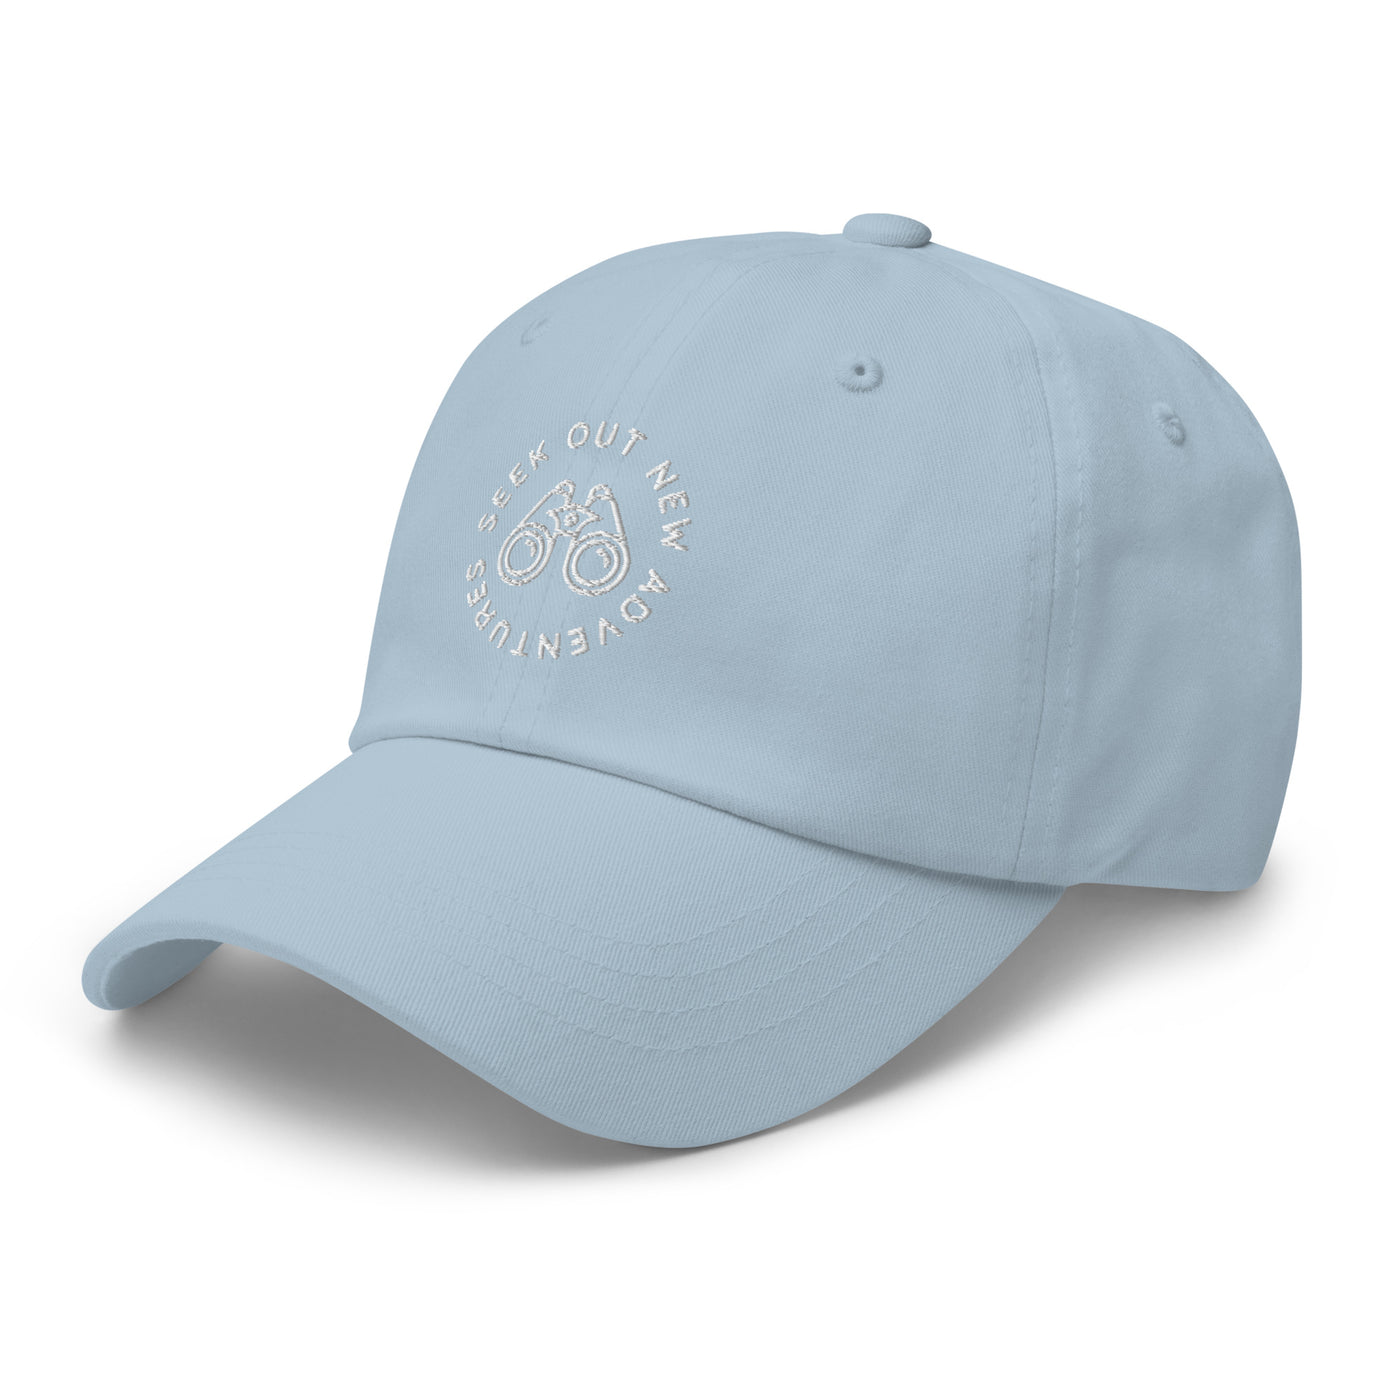 Seek Out New Adventures Embroidered Hat